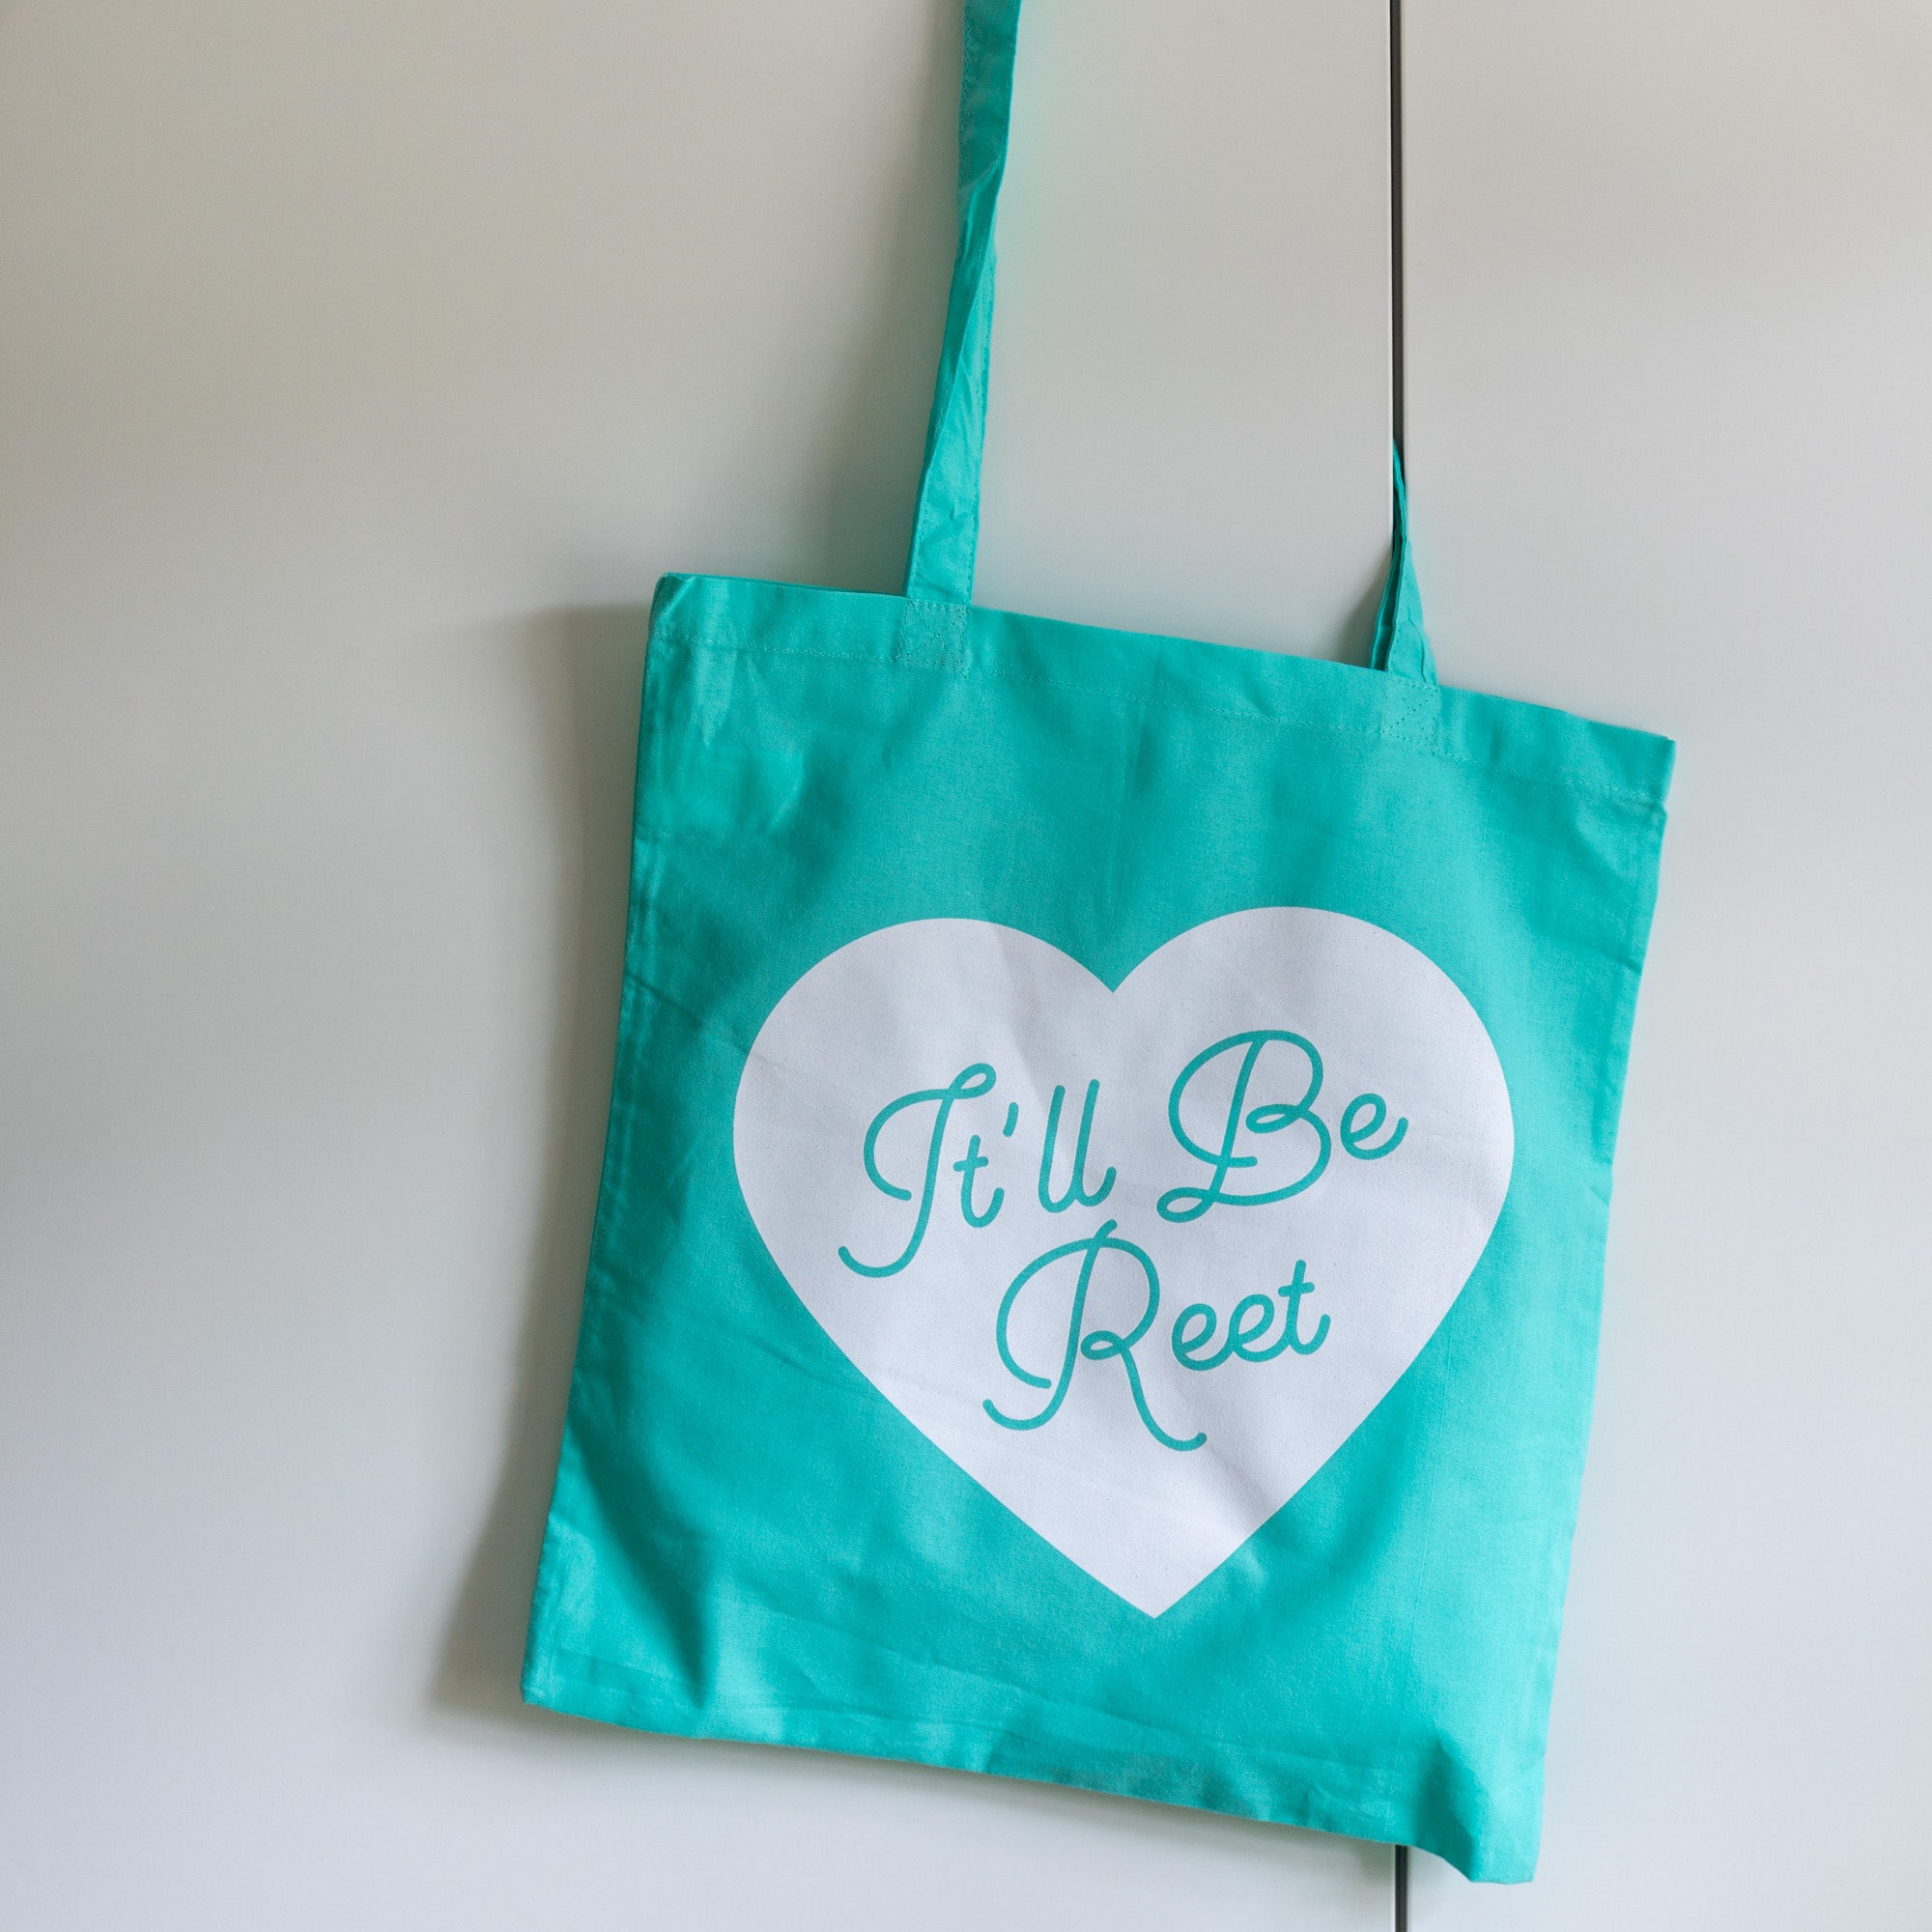 blue tote bag with white heart and It'll be reet printed slogan